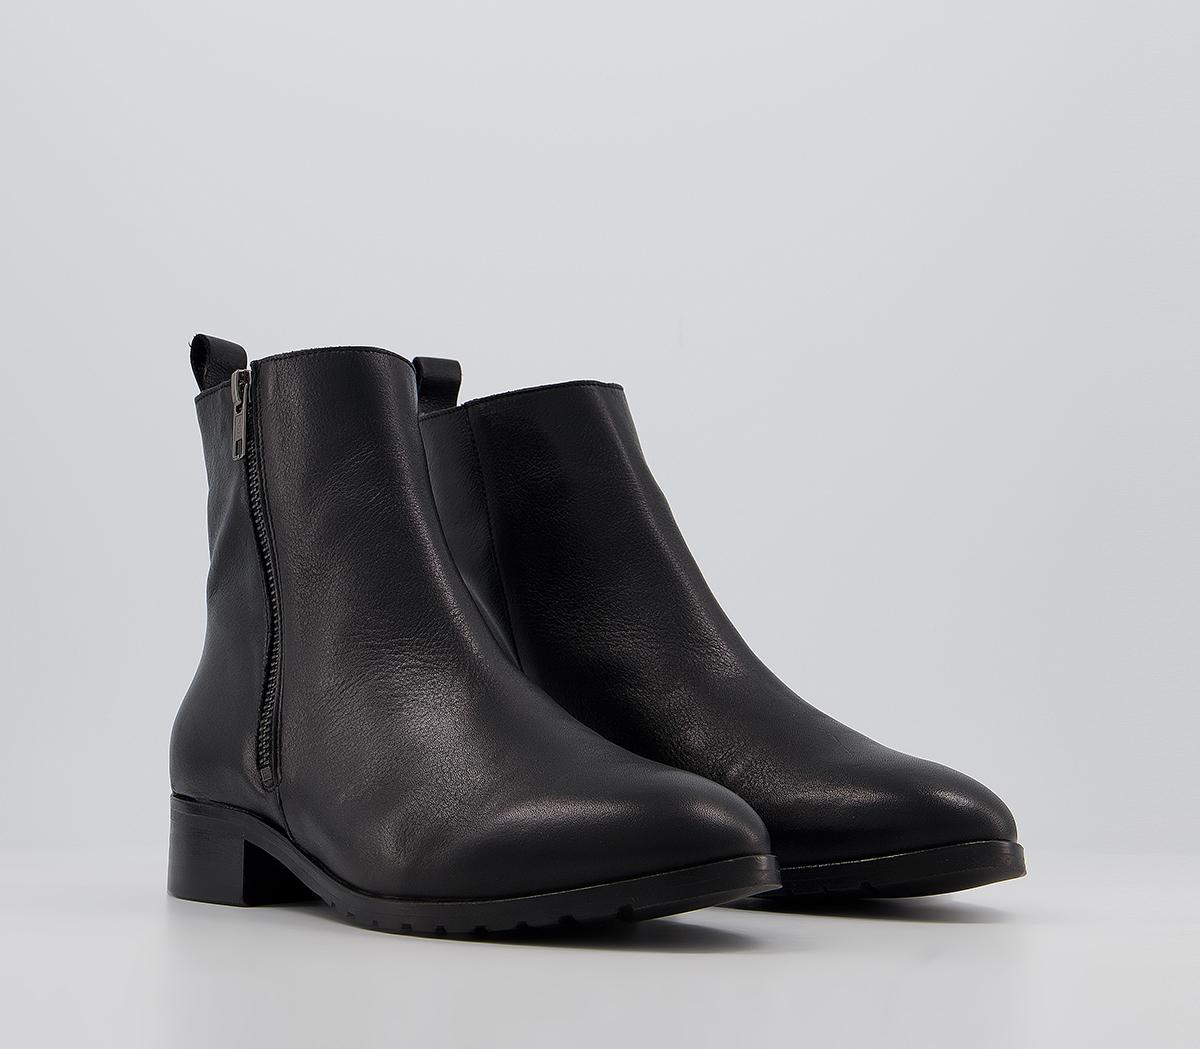 Office Advanced Cleated Side Zip Boots Black Leather - Ankle Boots